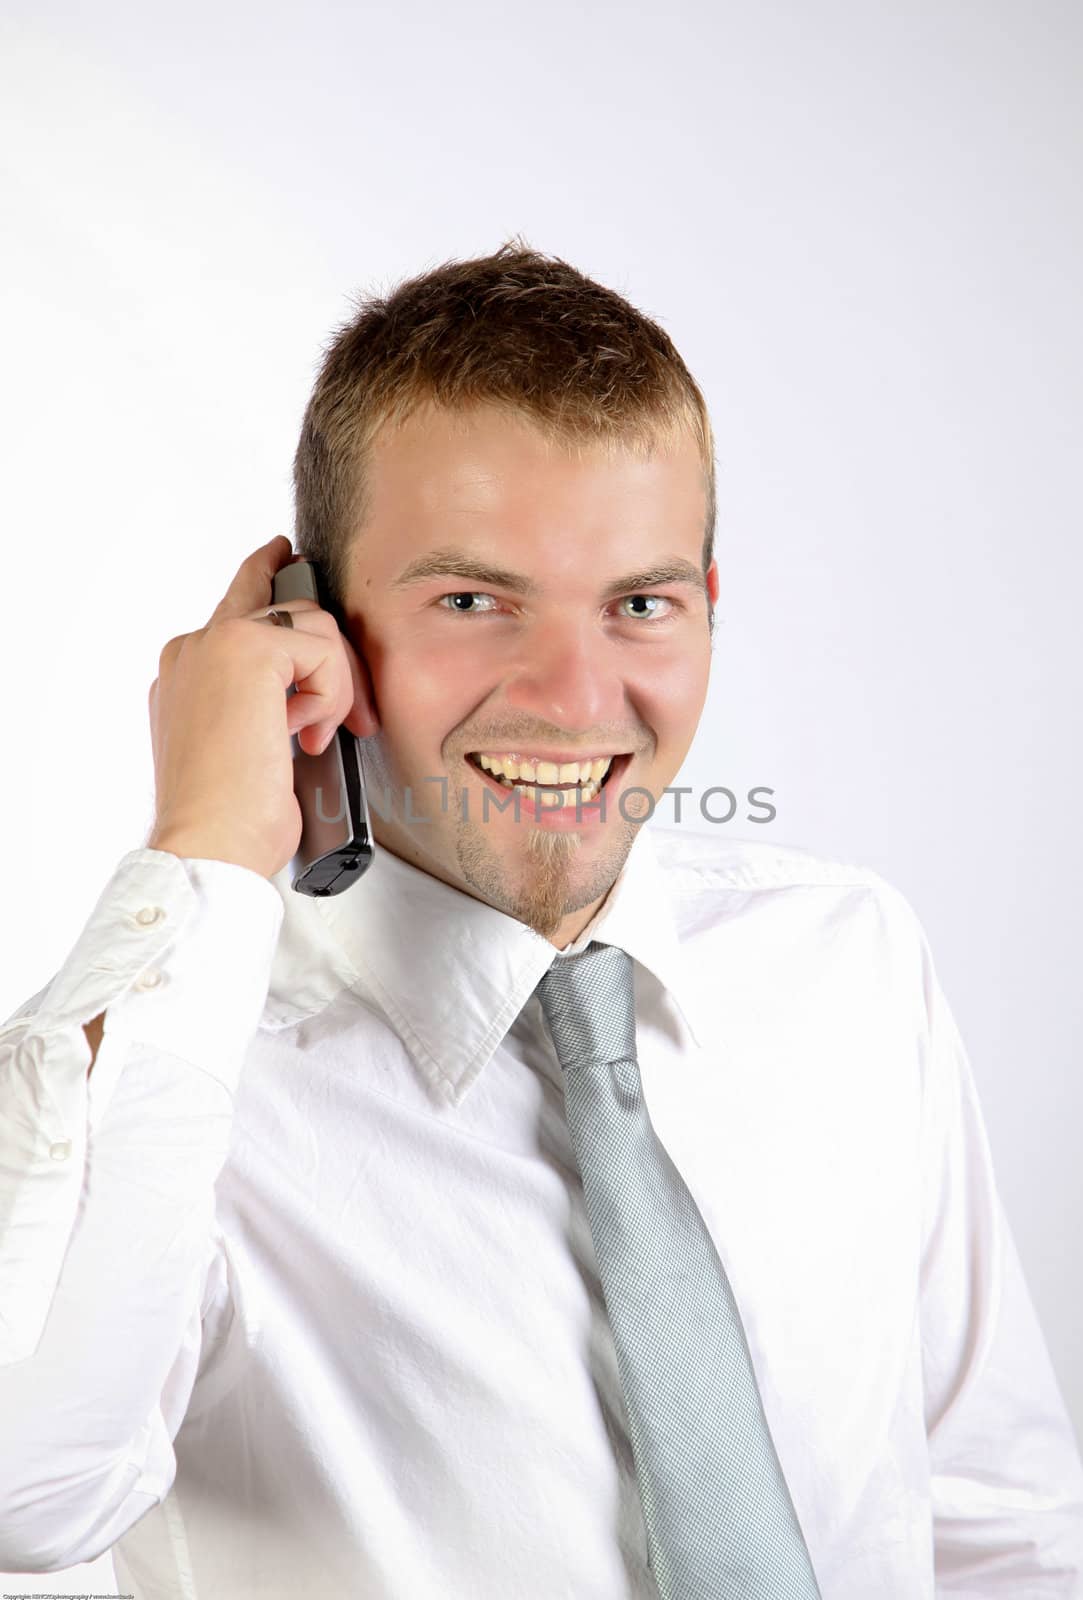 Cheerful Young Man On The Phone by nfx702